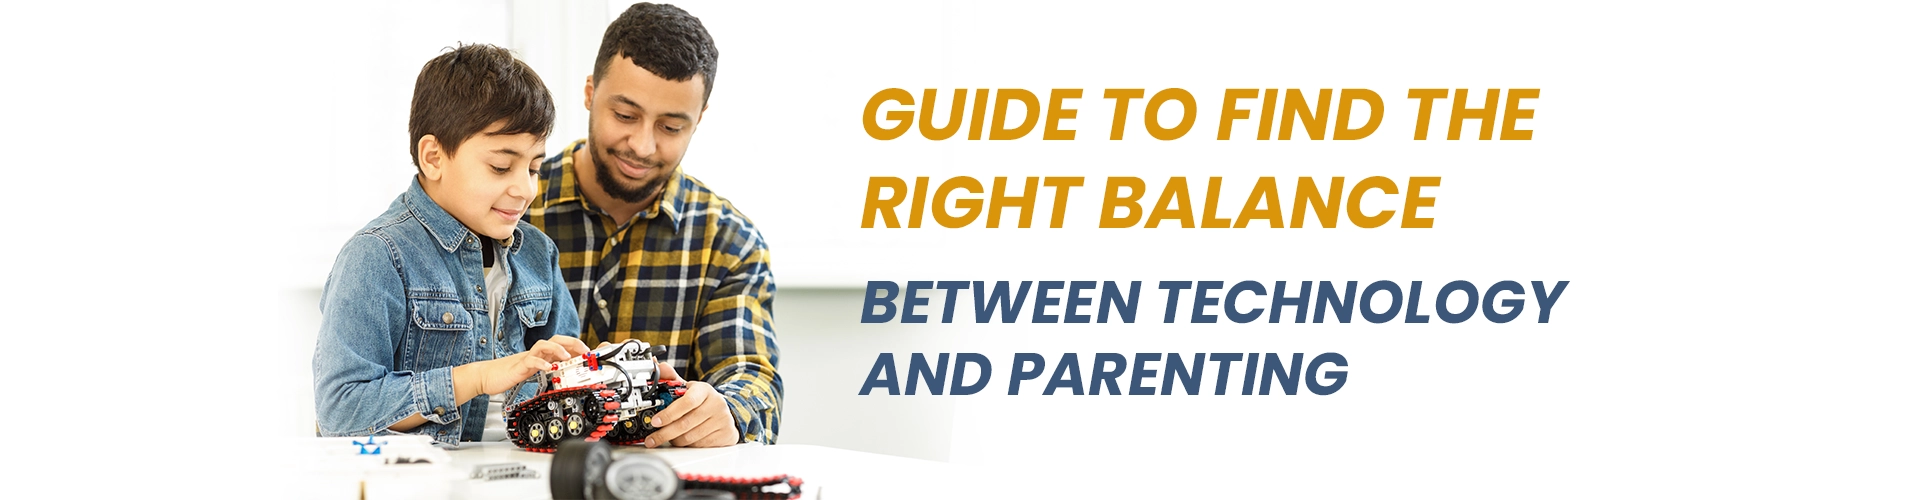 Guide to Find the Right Balance between Technology and Parenting